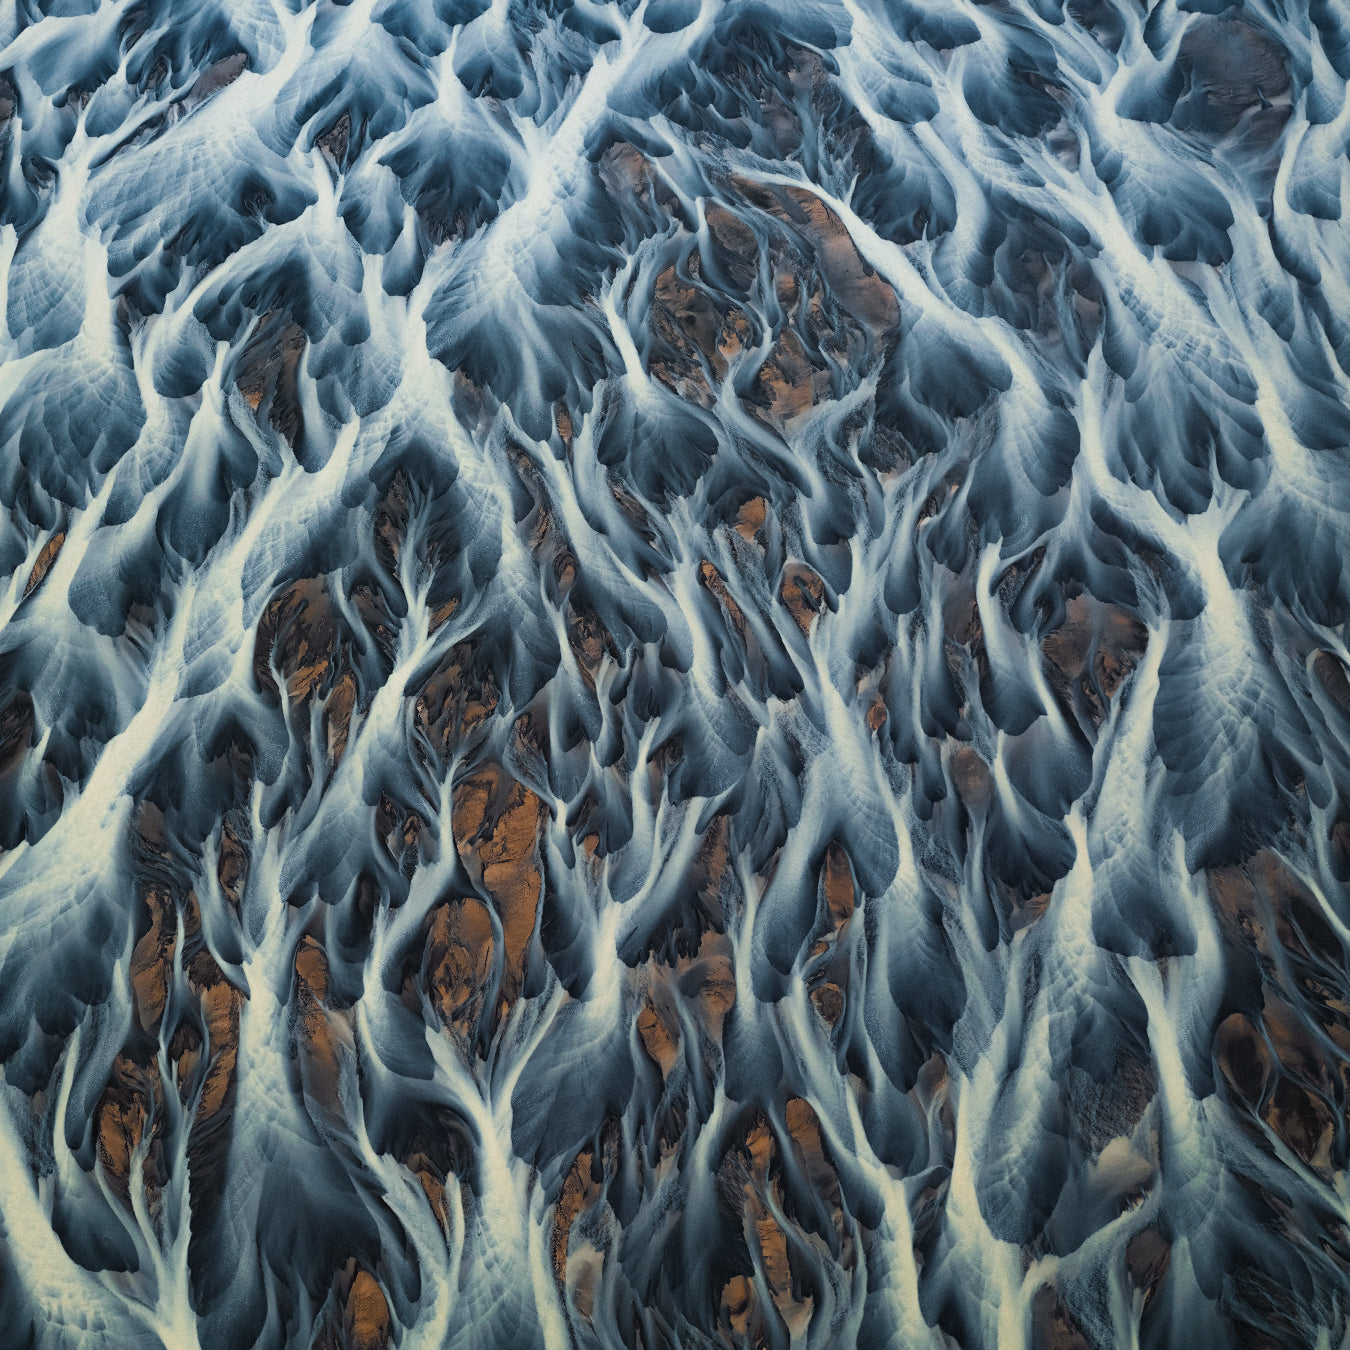 Glacier Rivers from Above featured opacity image